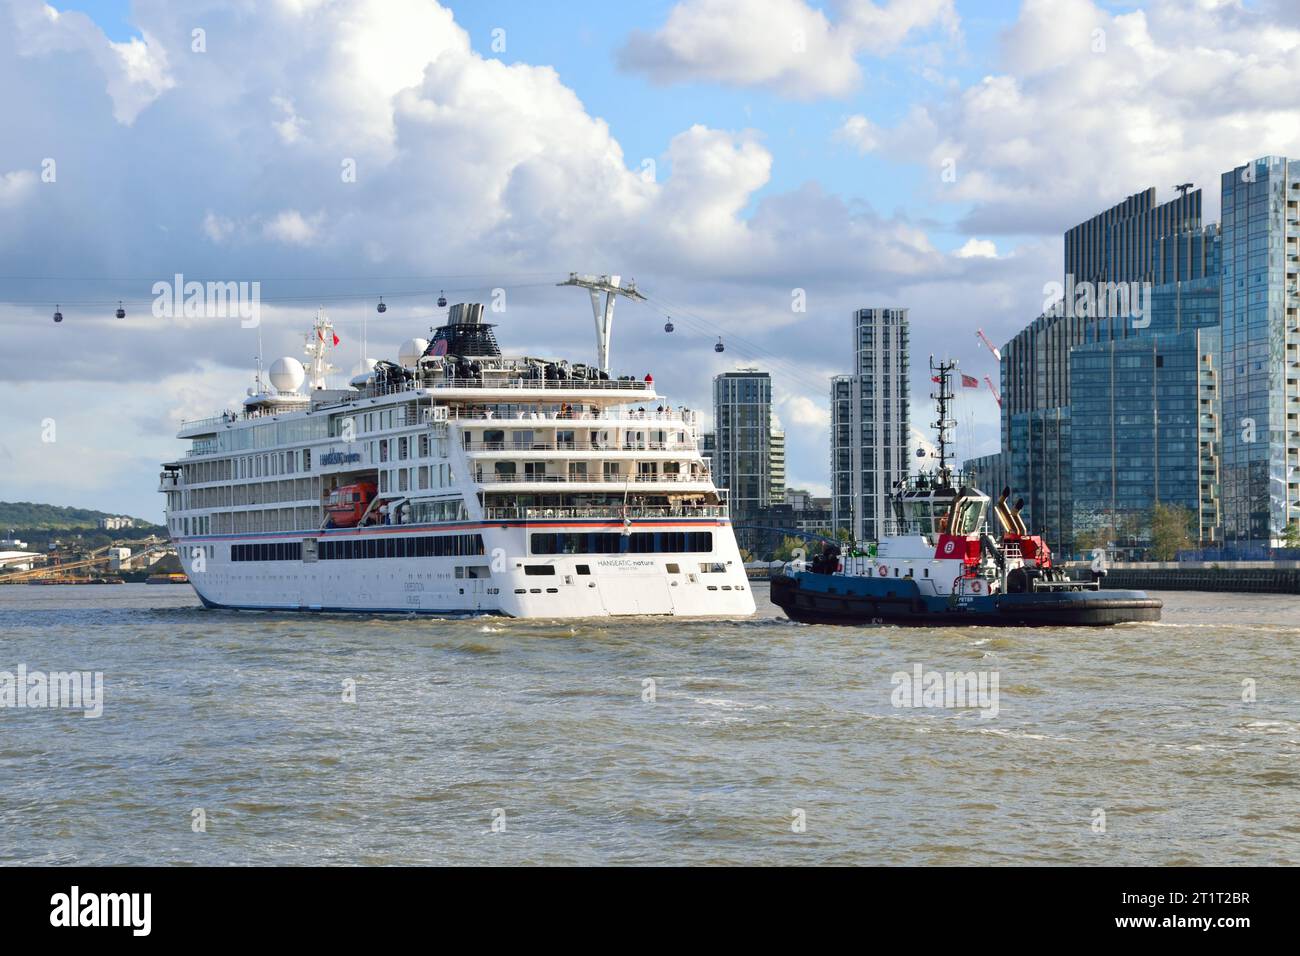 HANSEATIC nature expedition ship operated Hapag-Lloyd Cruises departs down the River Thames after t's maiden port call in London. Stock Photo